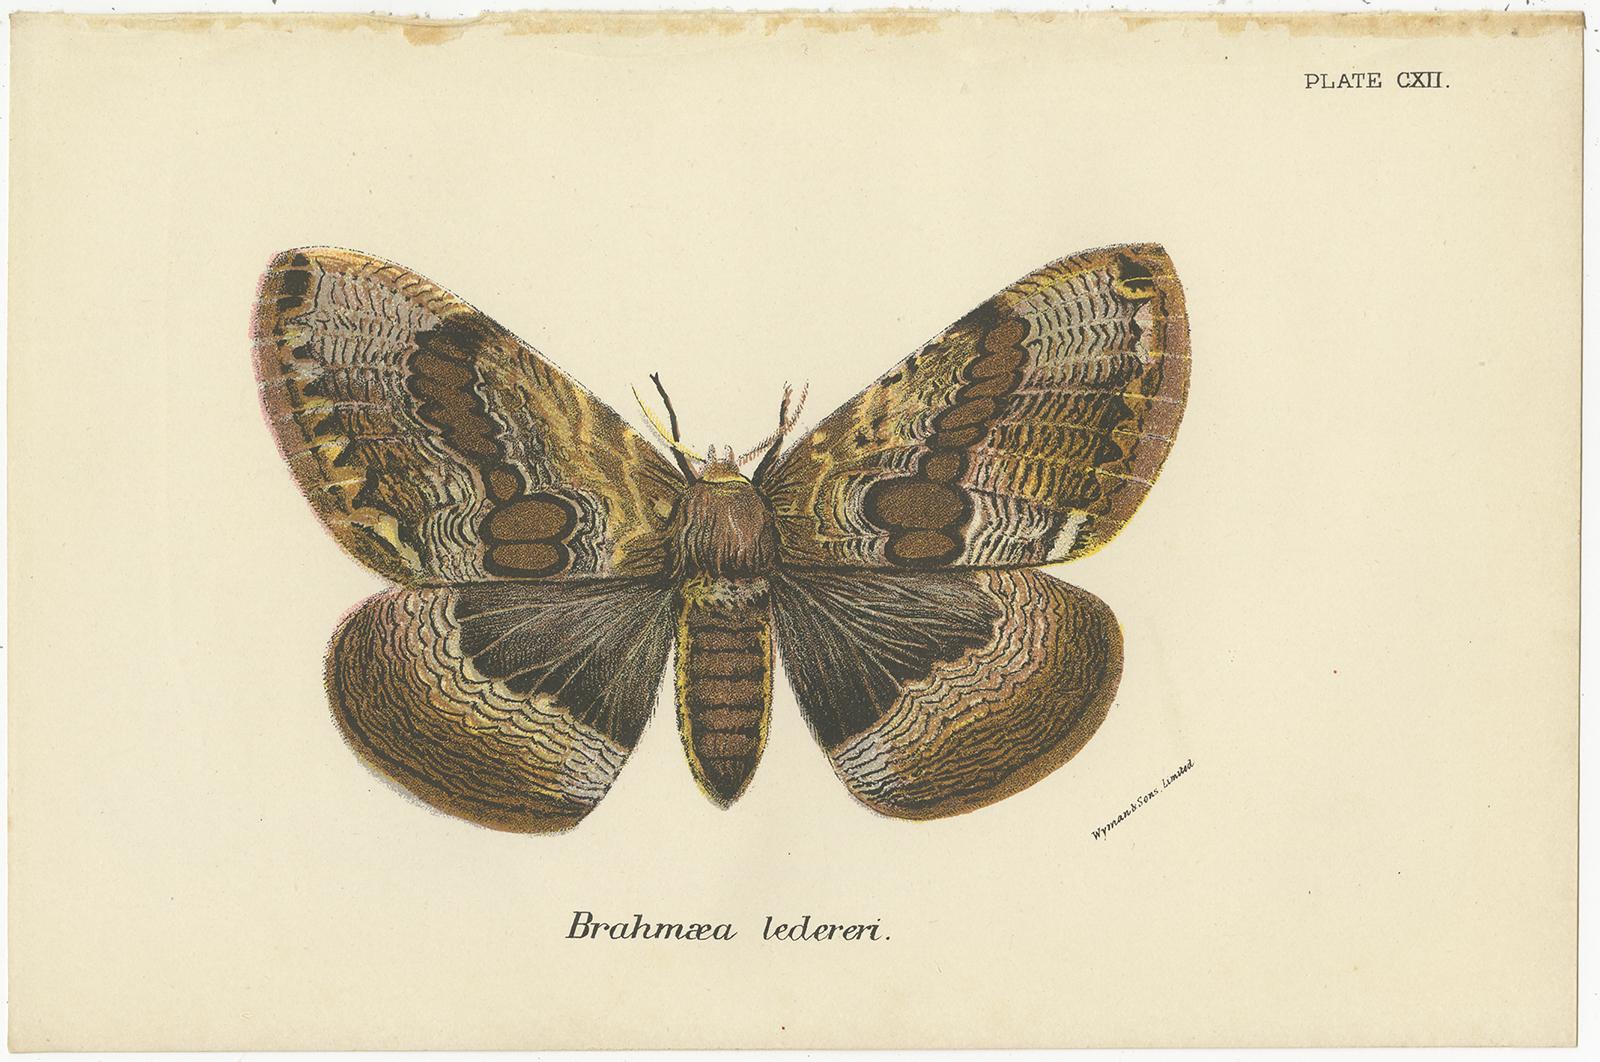 Set of two antique prints titled 'Brahmaea ledereri' and 'Citheronia regalis'. Brahmaea ledereri is a species of moth of the family Brahmaeidae and Citheronia regalis is also known as the regal moth or royal walnut moth. These prints originate from